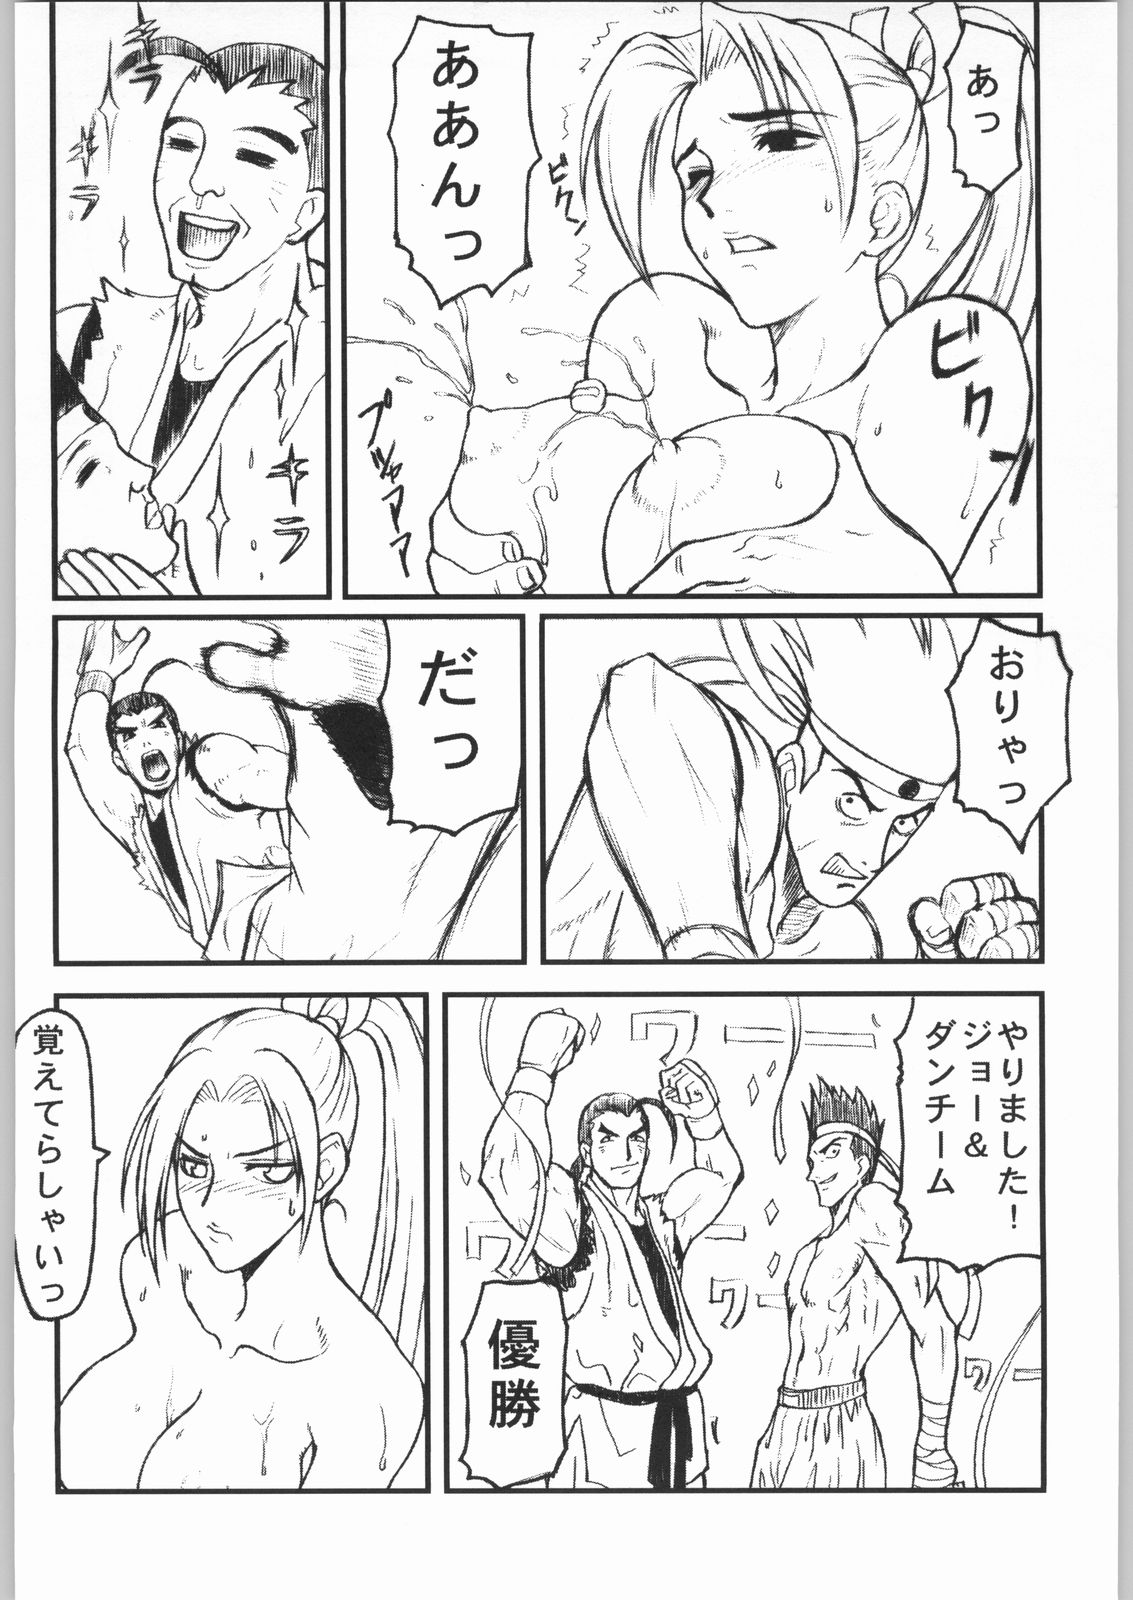 [SNK] Shiranui (Over Flows) page 23 full